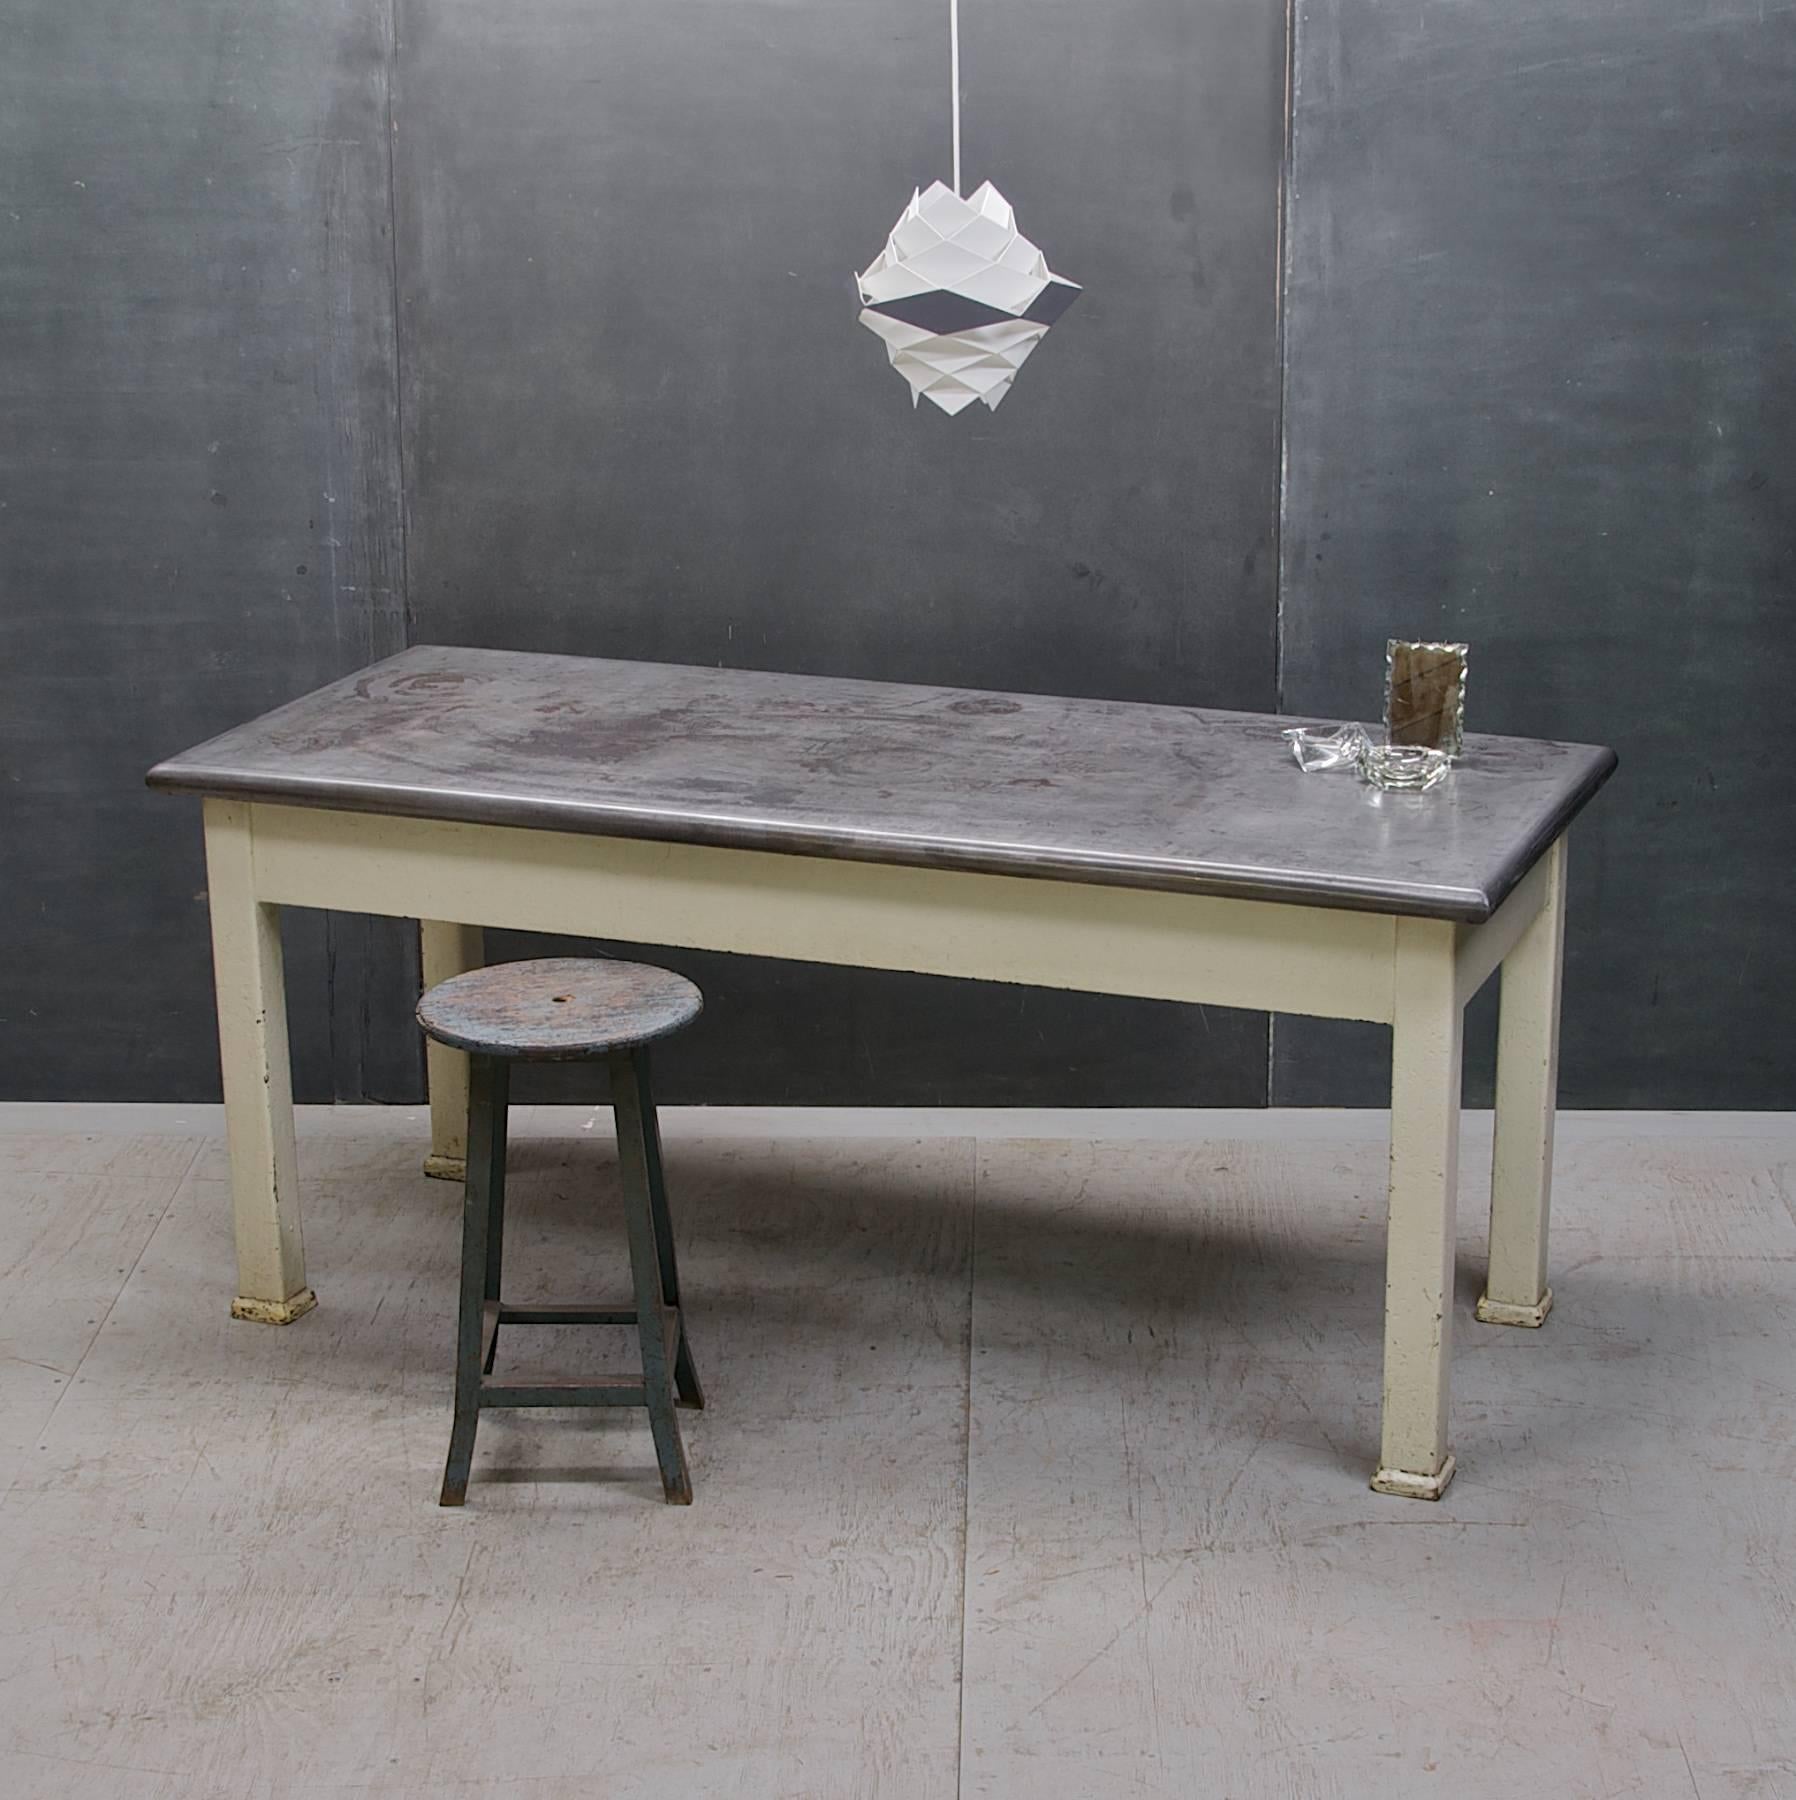 An all steel constructed table with, all tight and sturdy, will with stand weight of commercial cooking tools. W: 72½ X 30½ X 32 in. Ground to bottom of table skirt is 24¼ in.